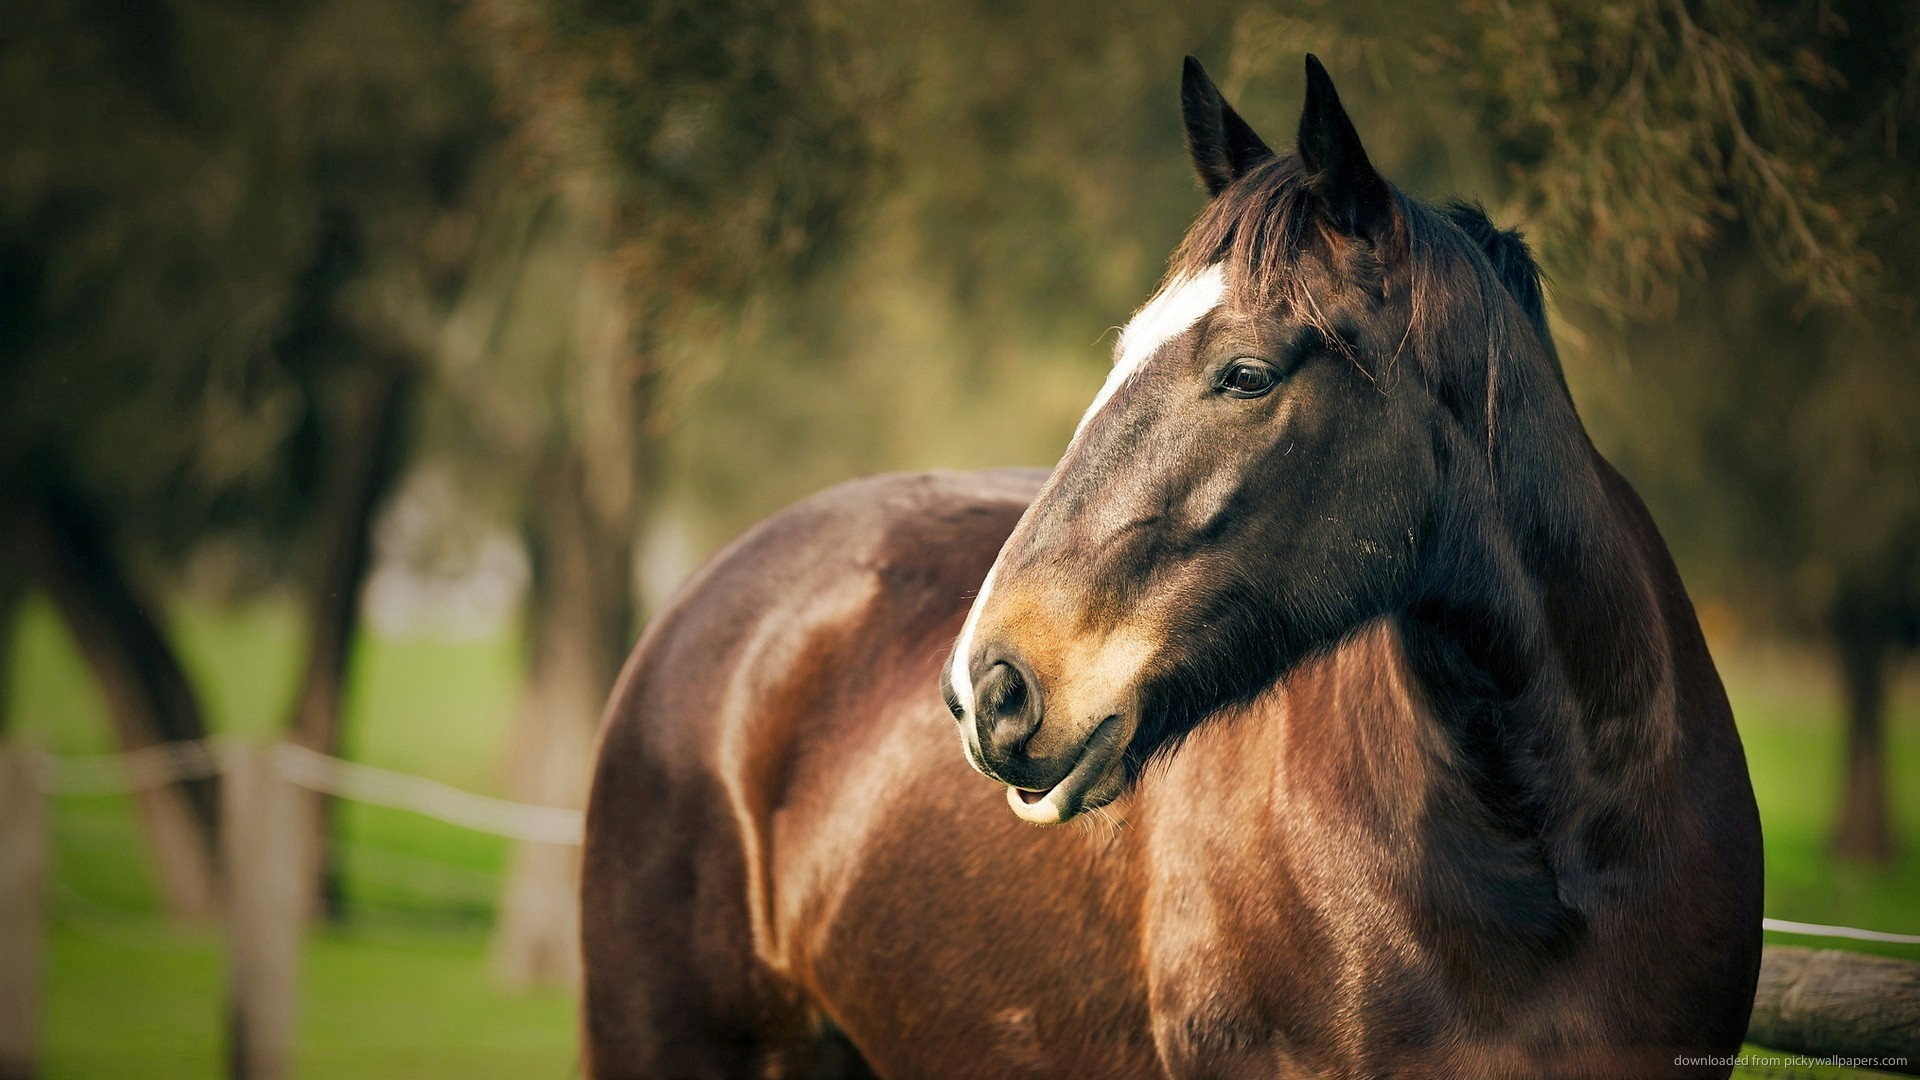 Gorgeous Brown Horse Up Close Wallpaper Picture For iPhone Blackberry